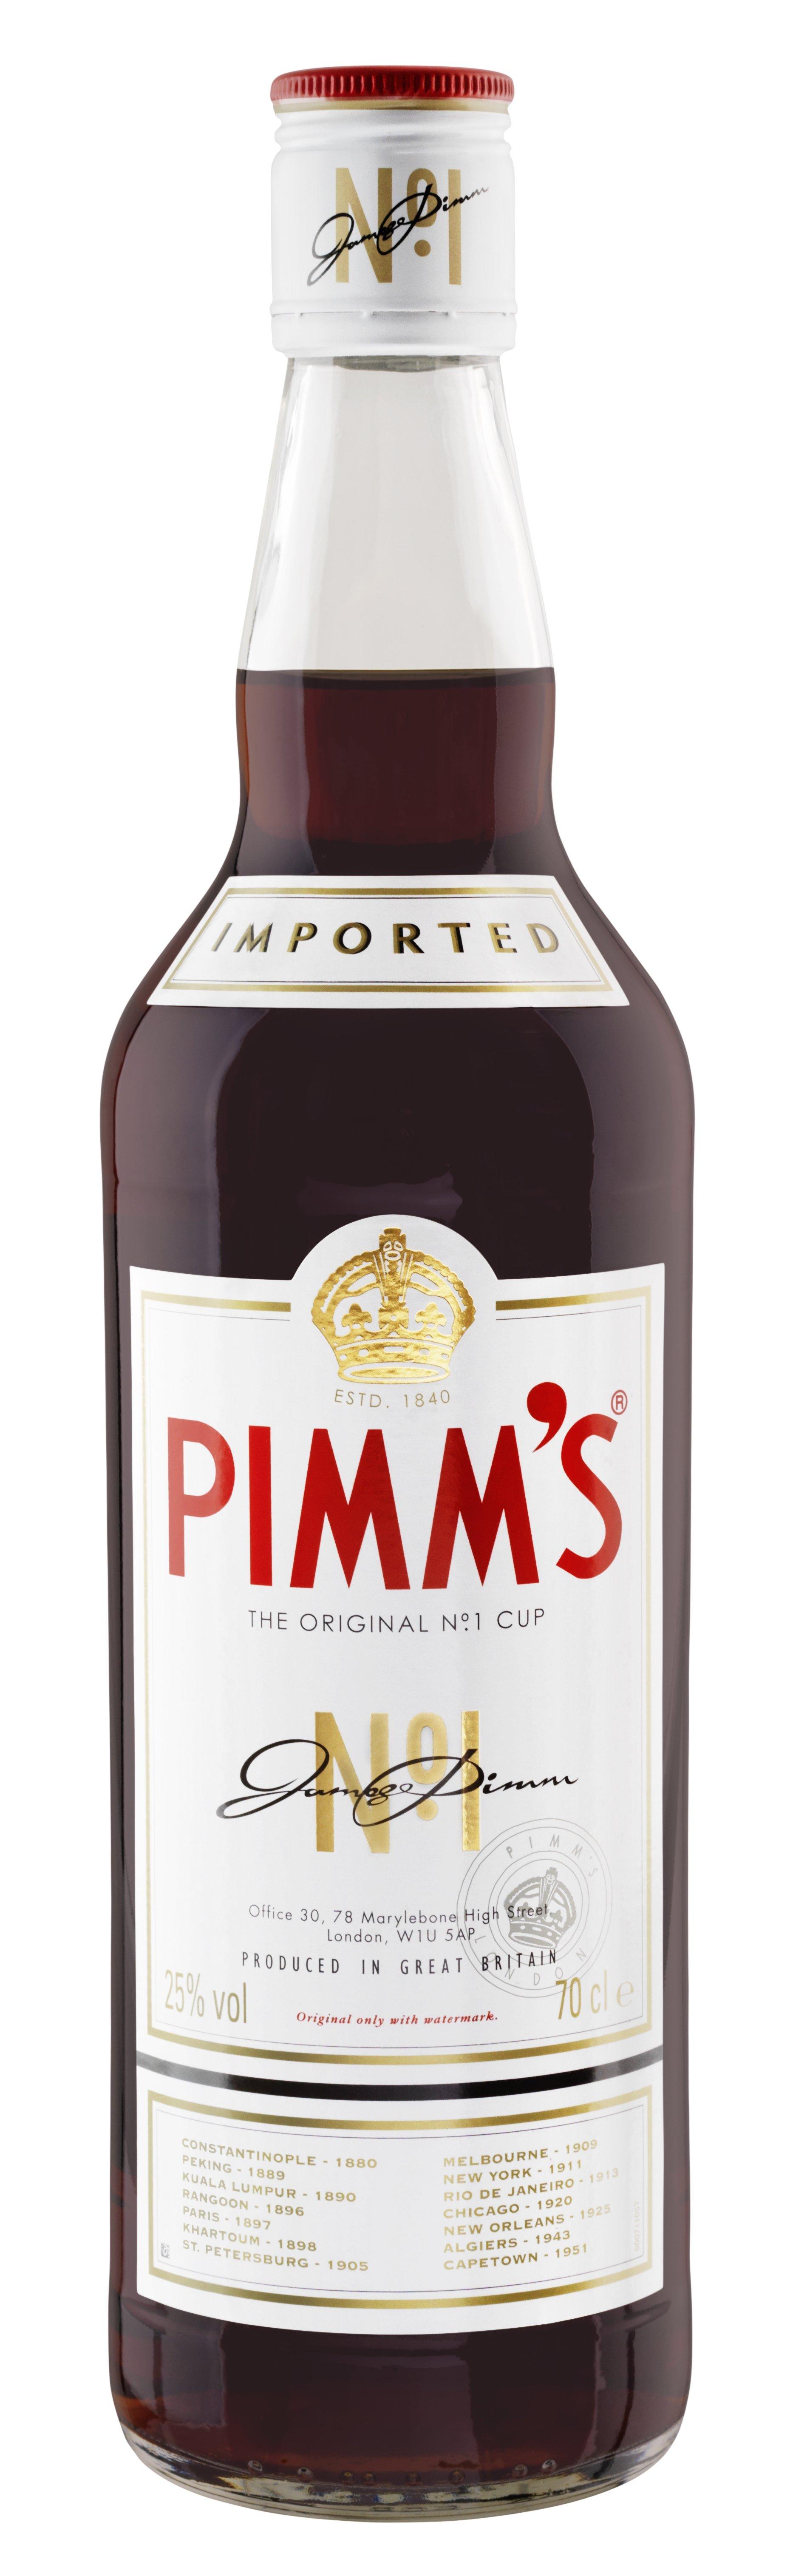 Image of Pimm's No. 1 Cup - 70 cl